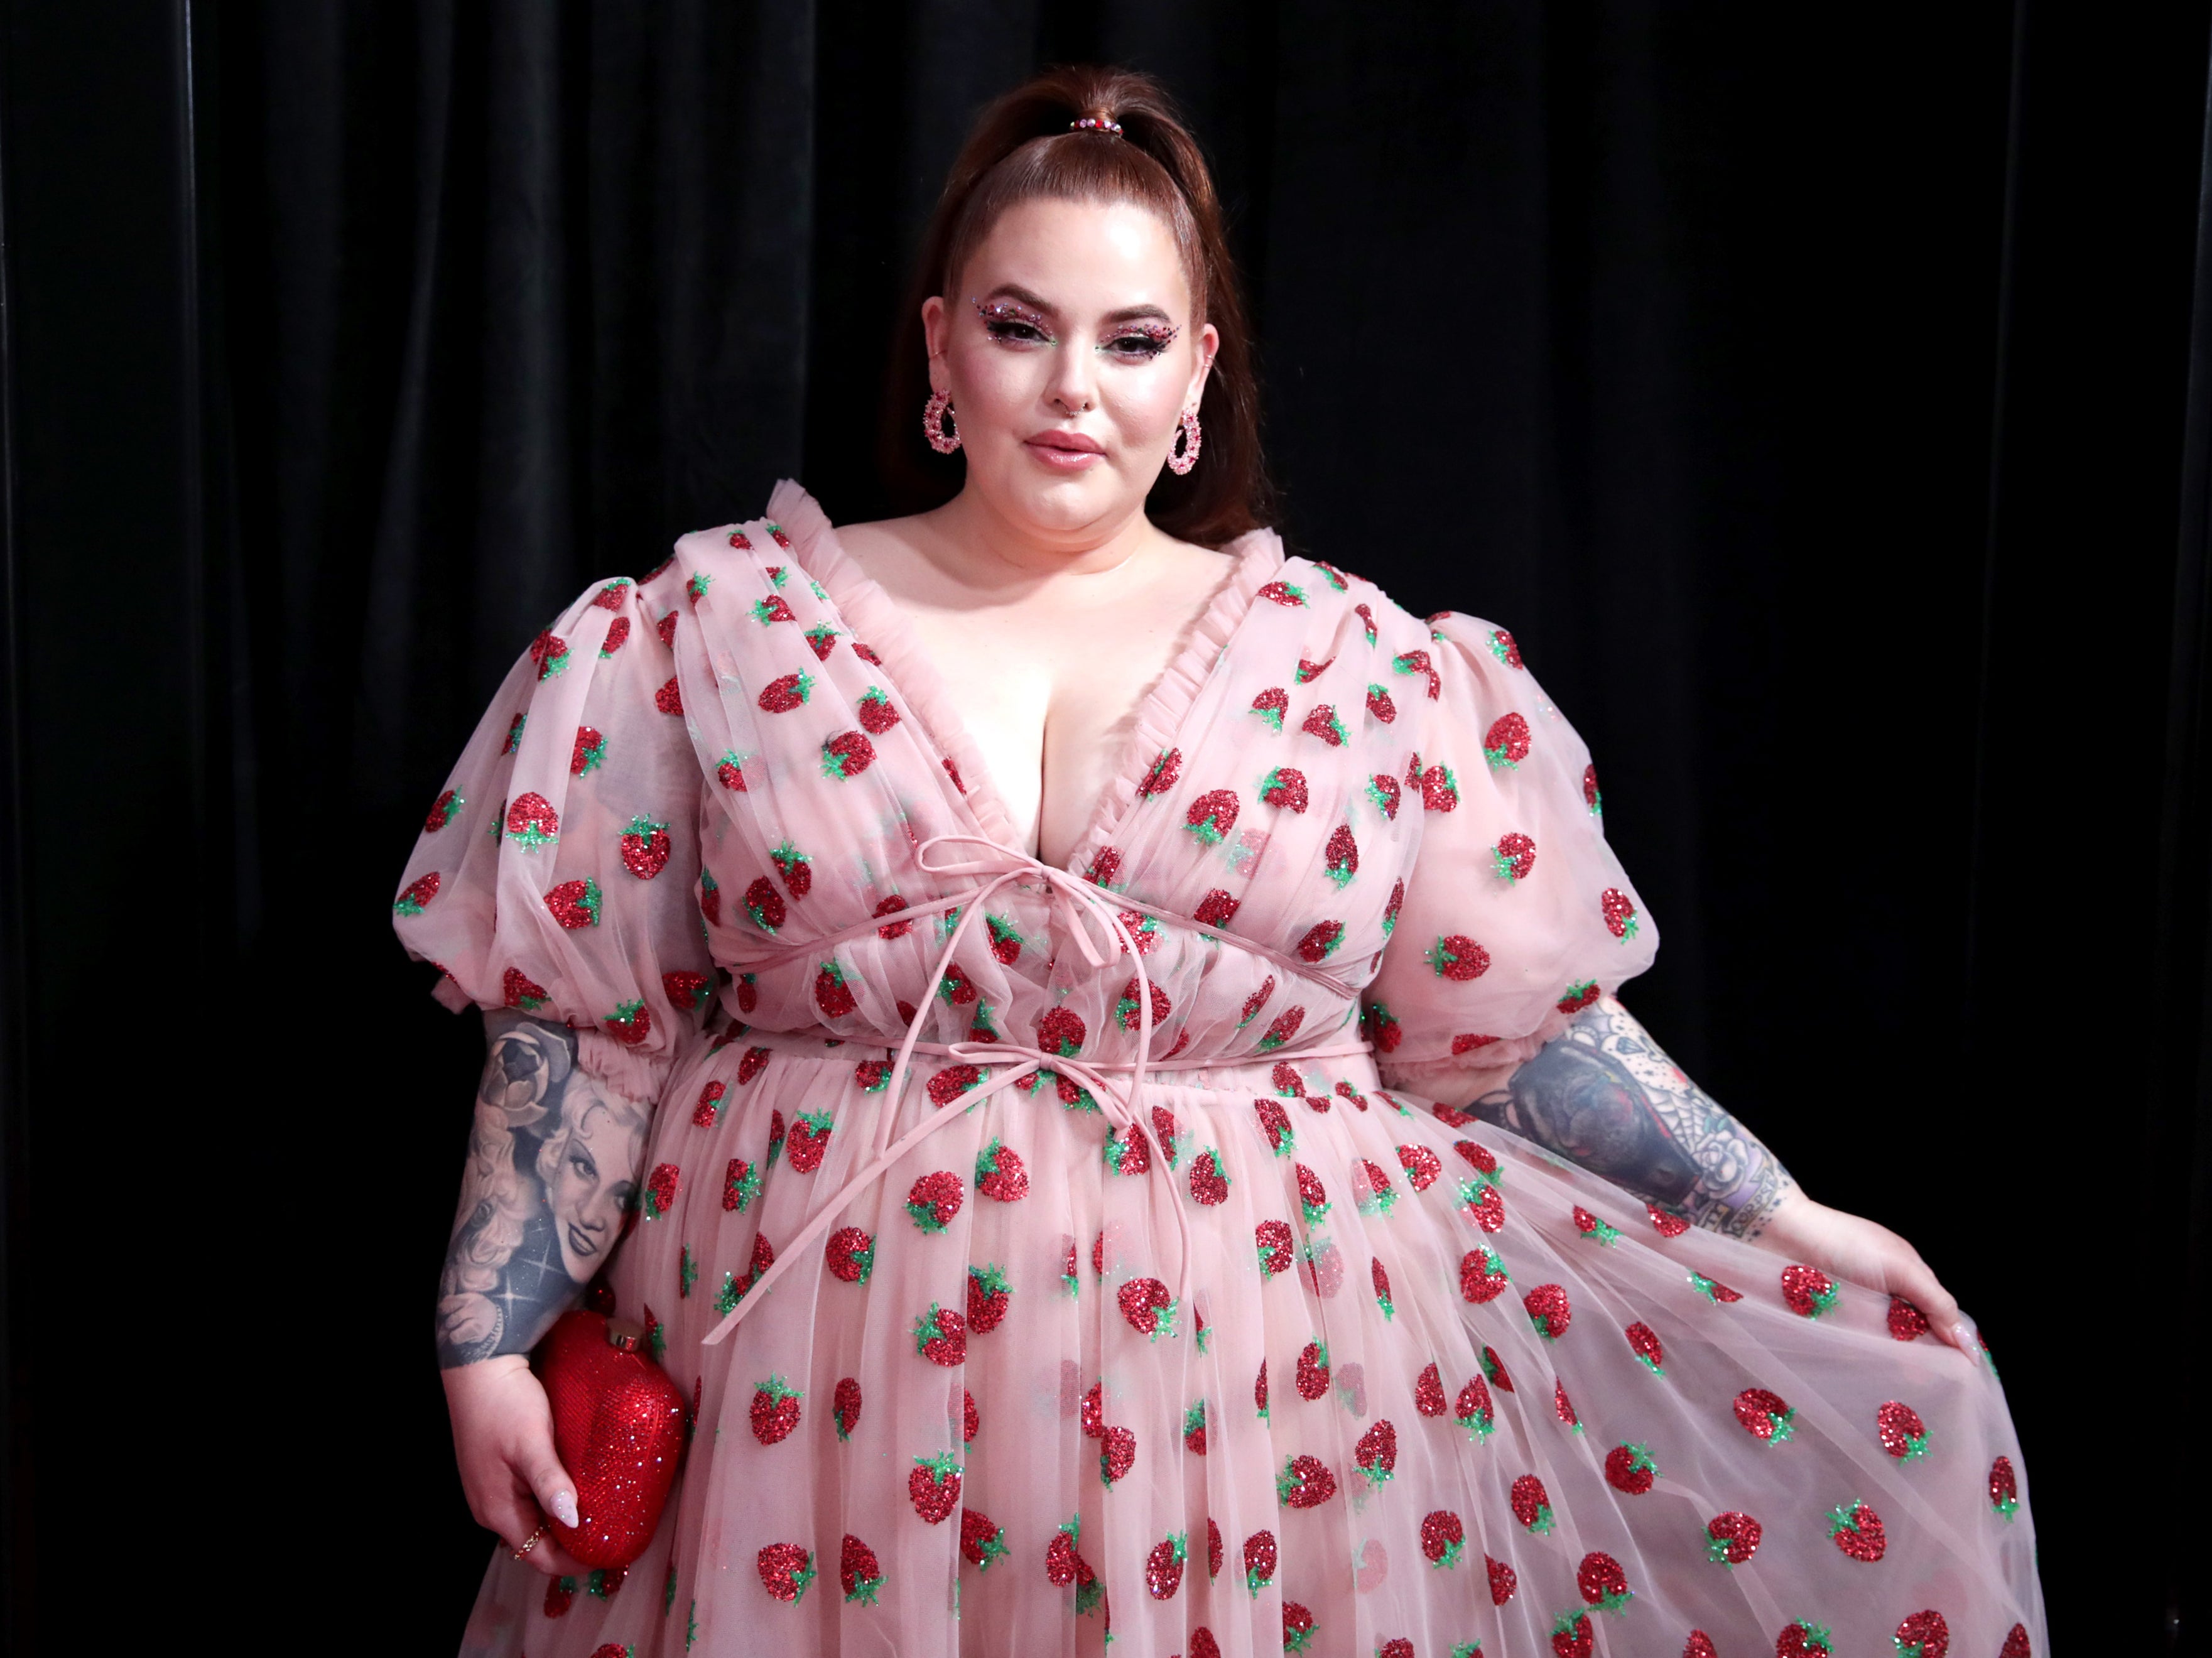 Tess Holliday at the the 62nd Annual GRAMMY Awards